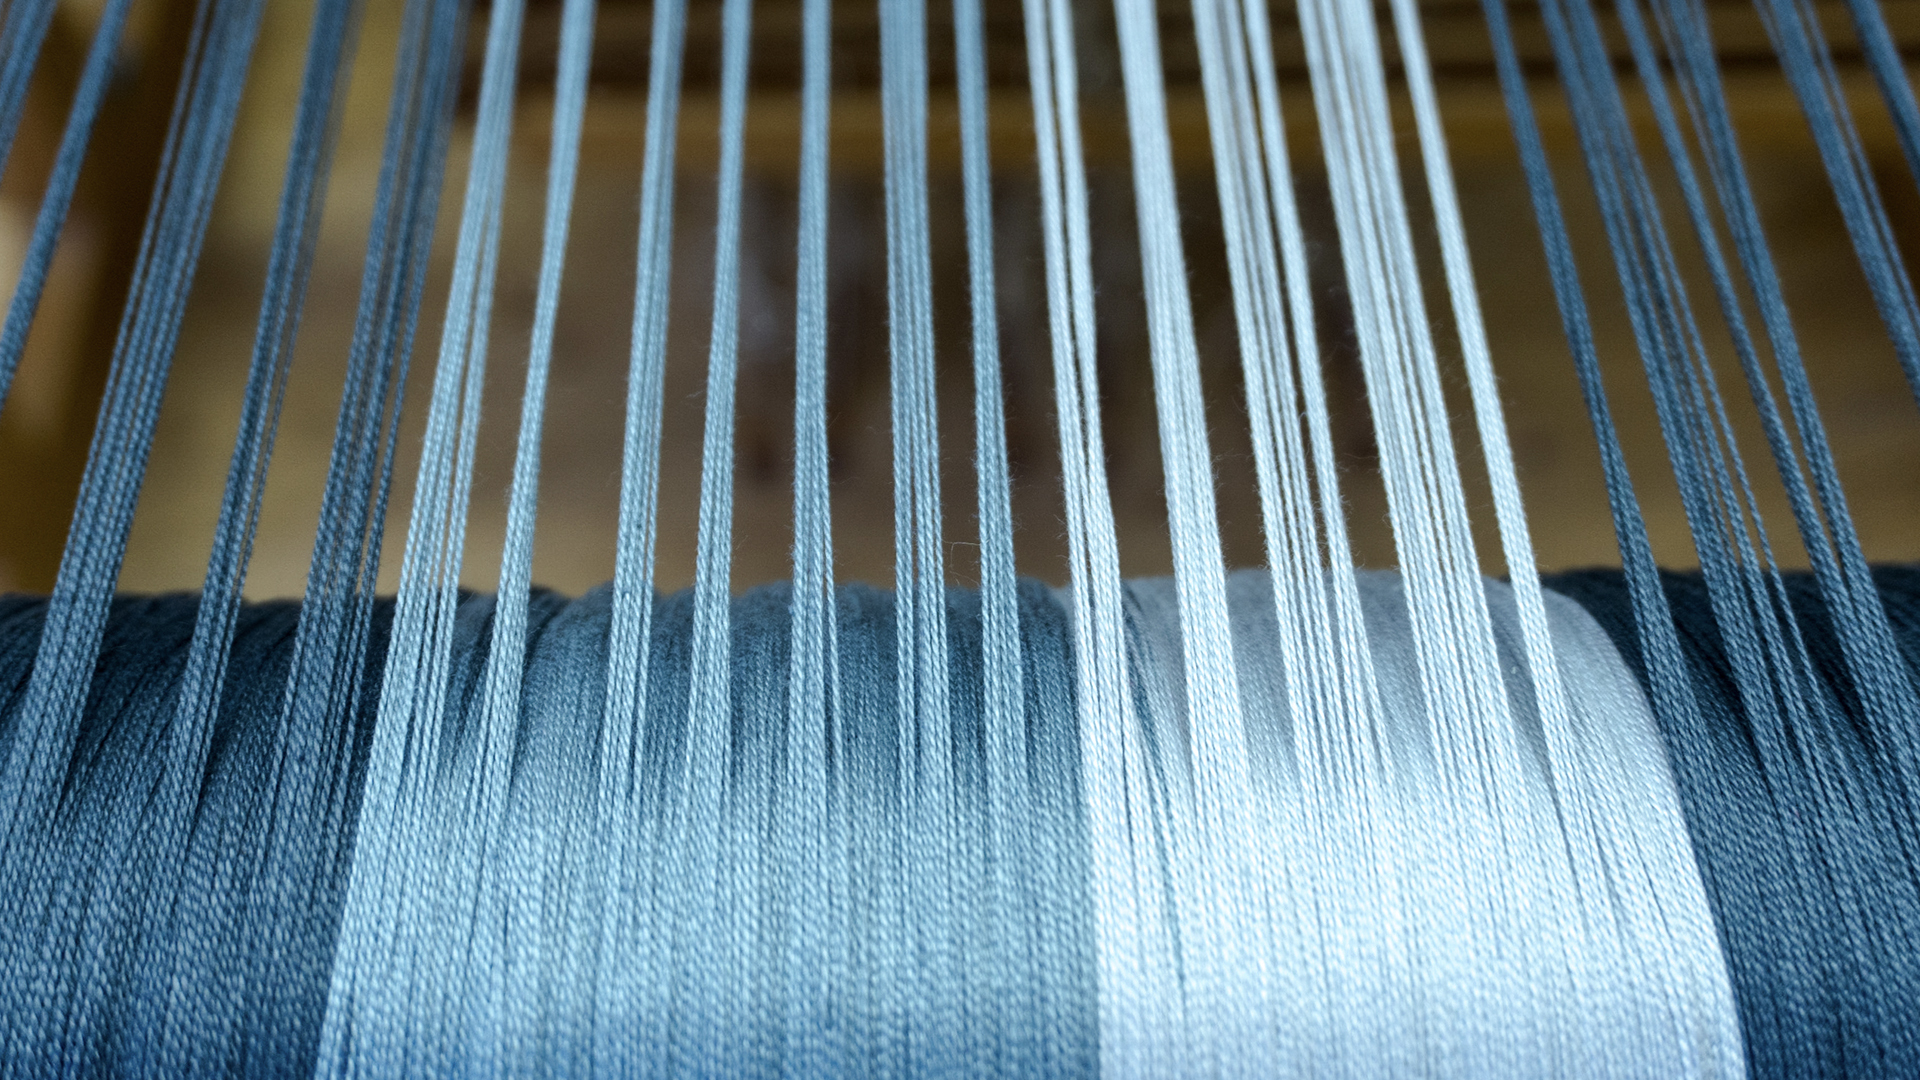 Various threads in shades of blue.